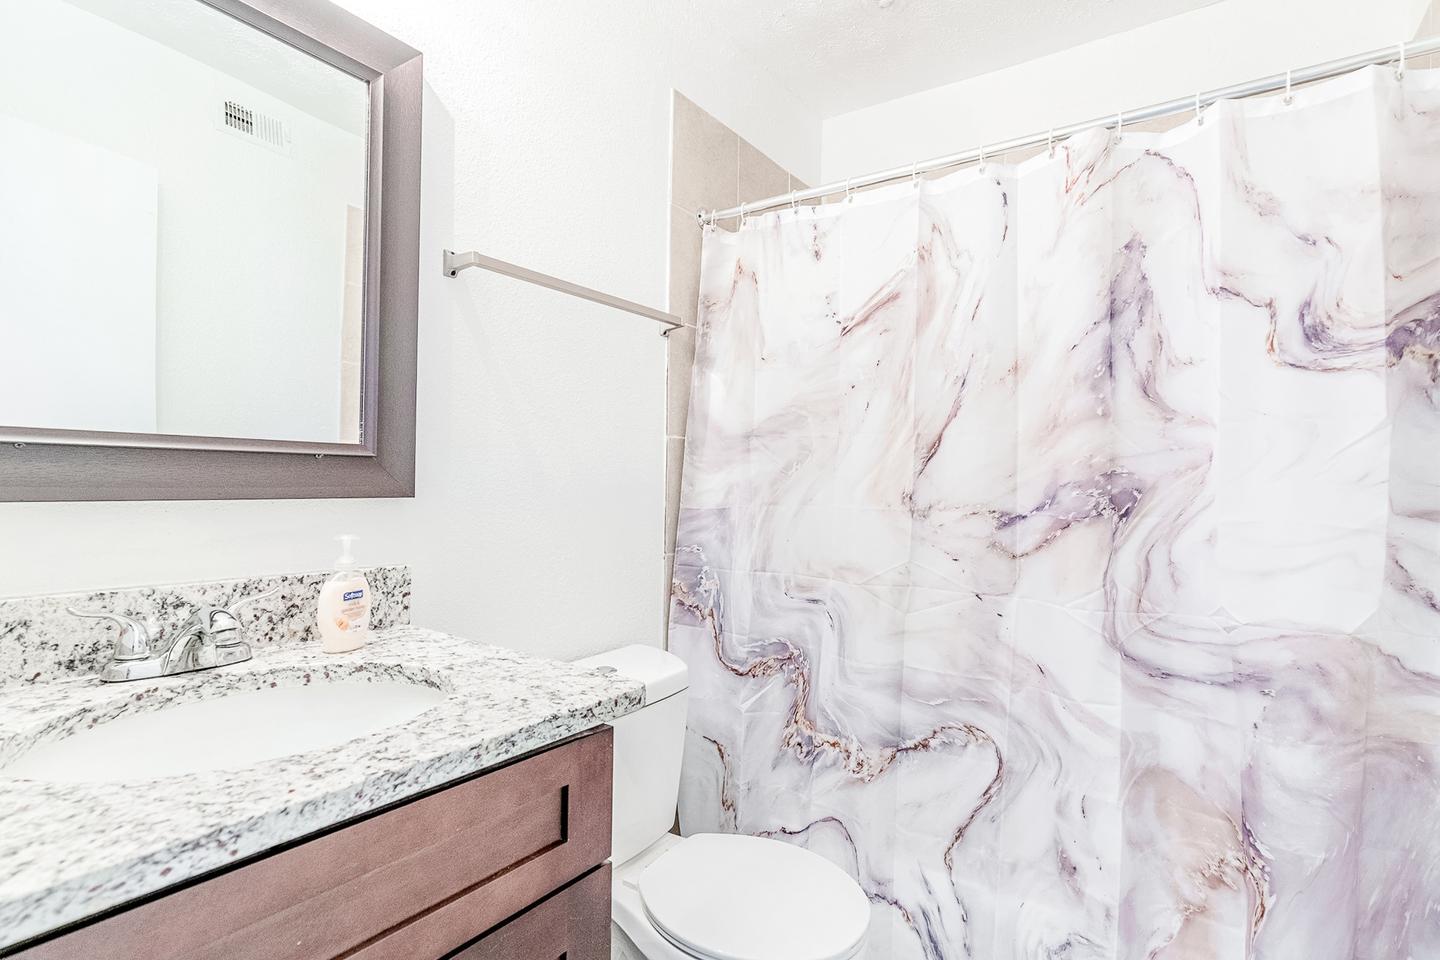 Spacious shared bathroom featuring commode, tub/shower combo and granite countertops.